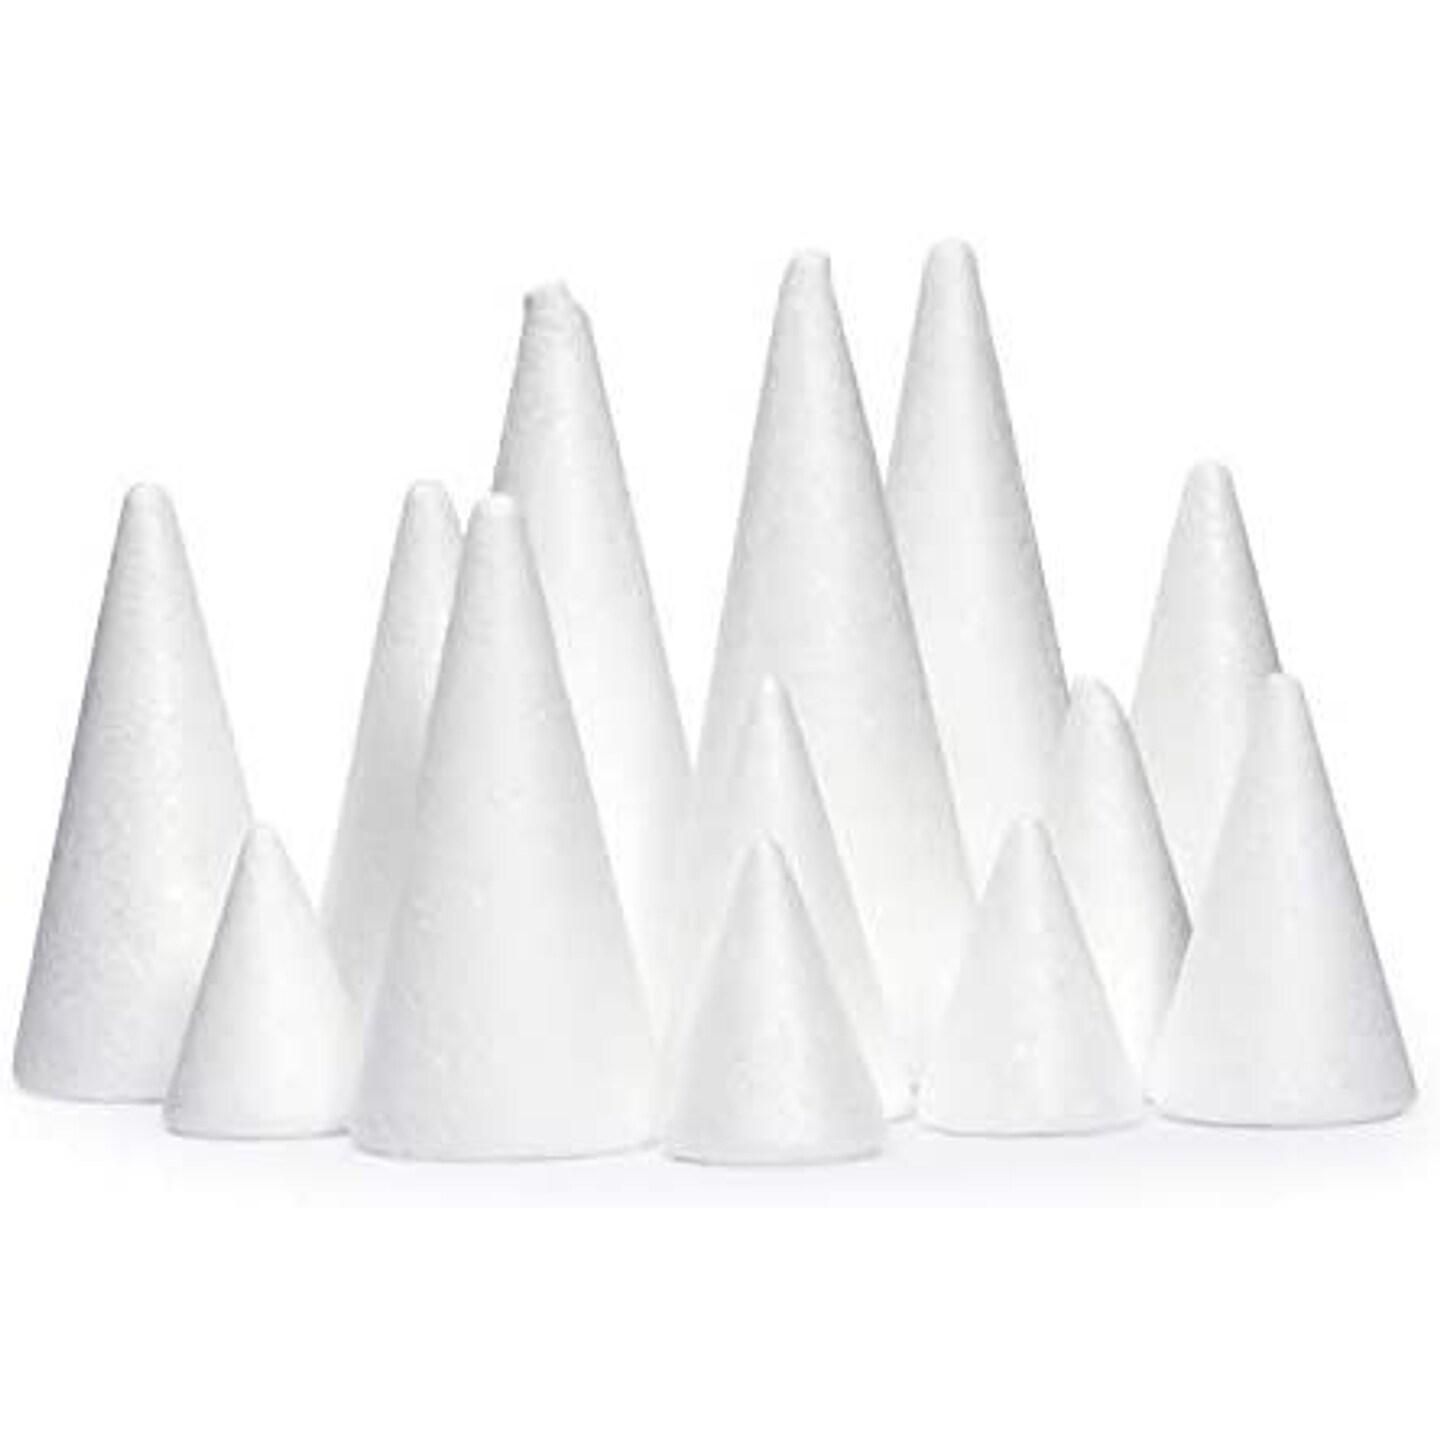 12-Pack Sculpting Foam Blocks for DIY Arts and Craft, White, 4 x 4 x 2